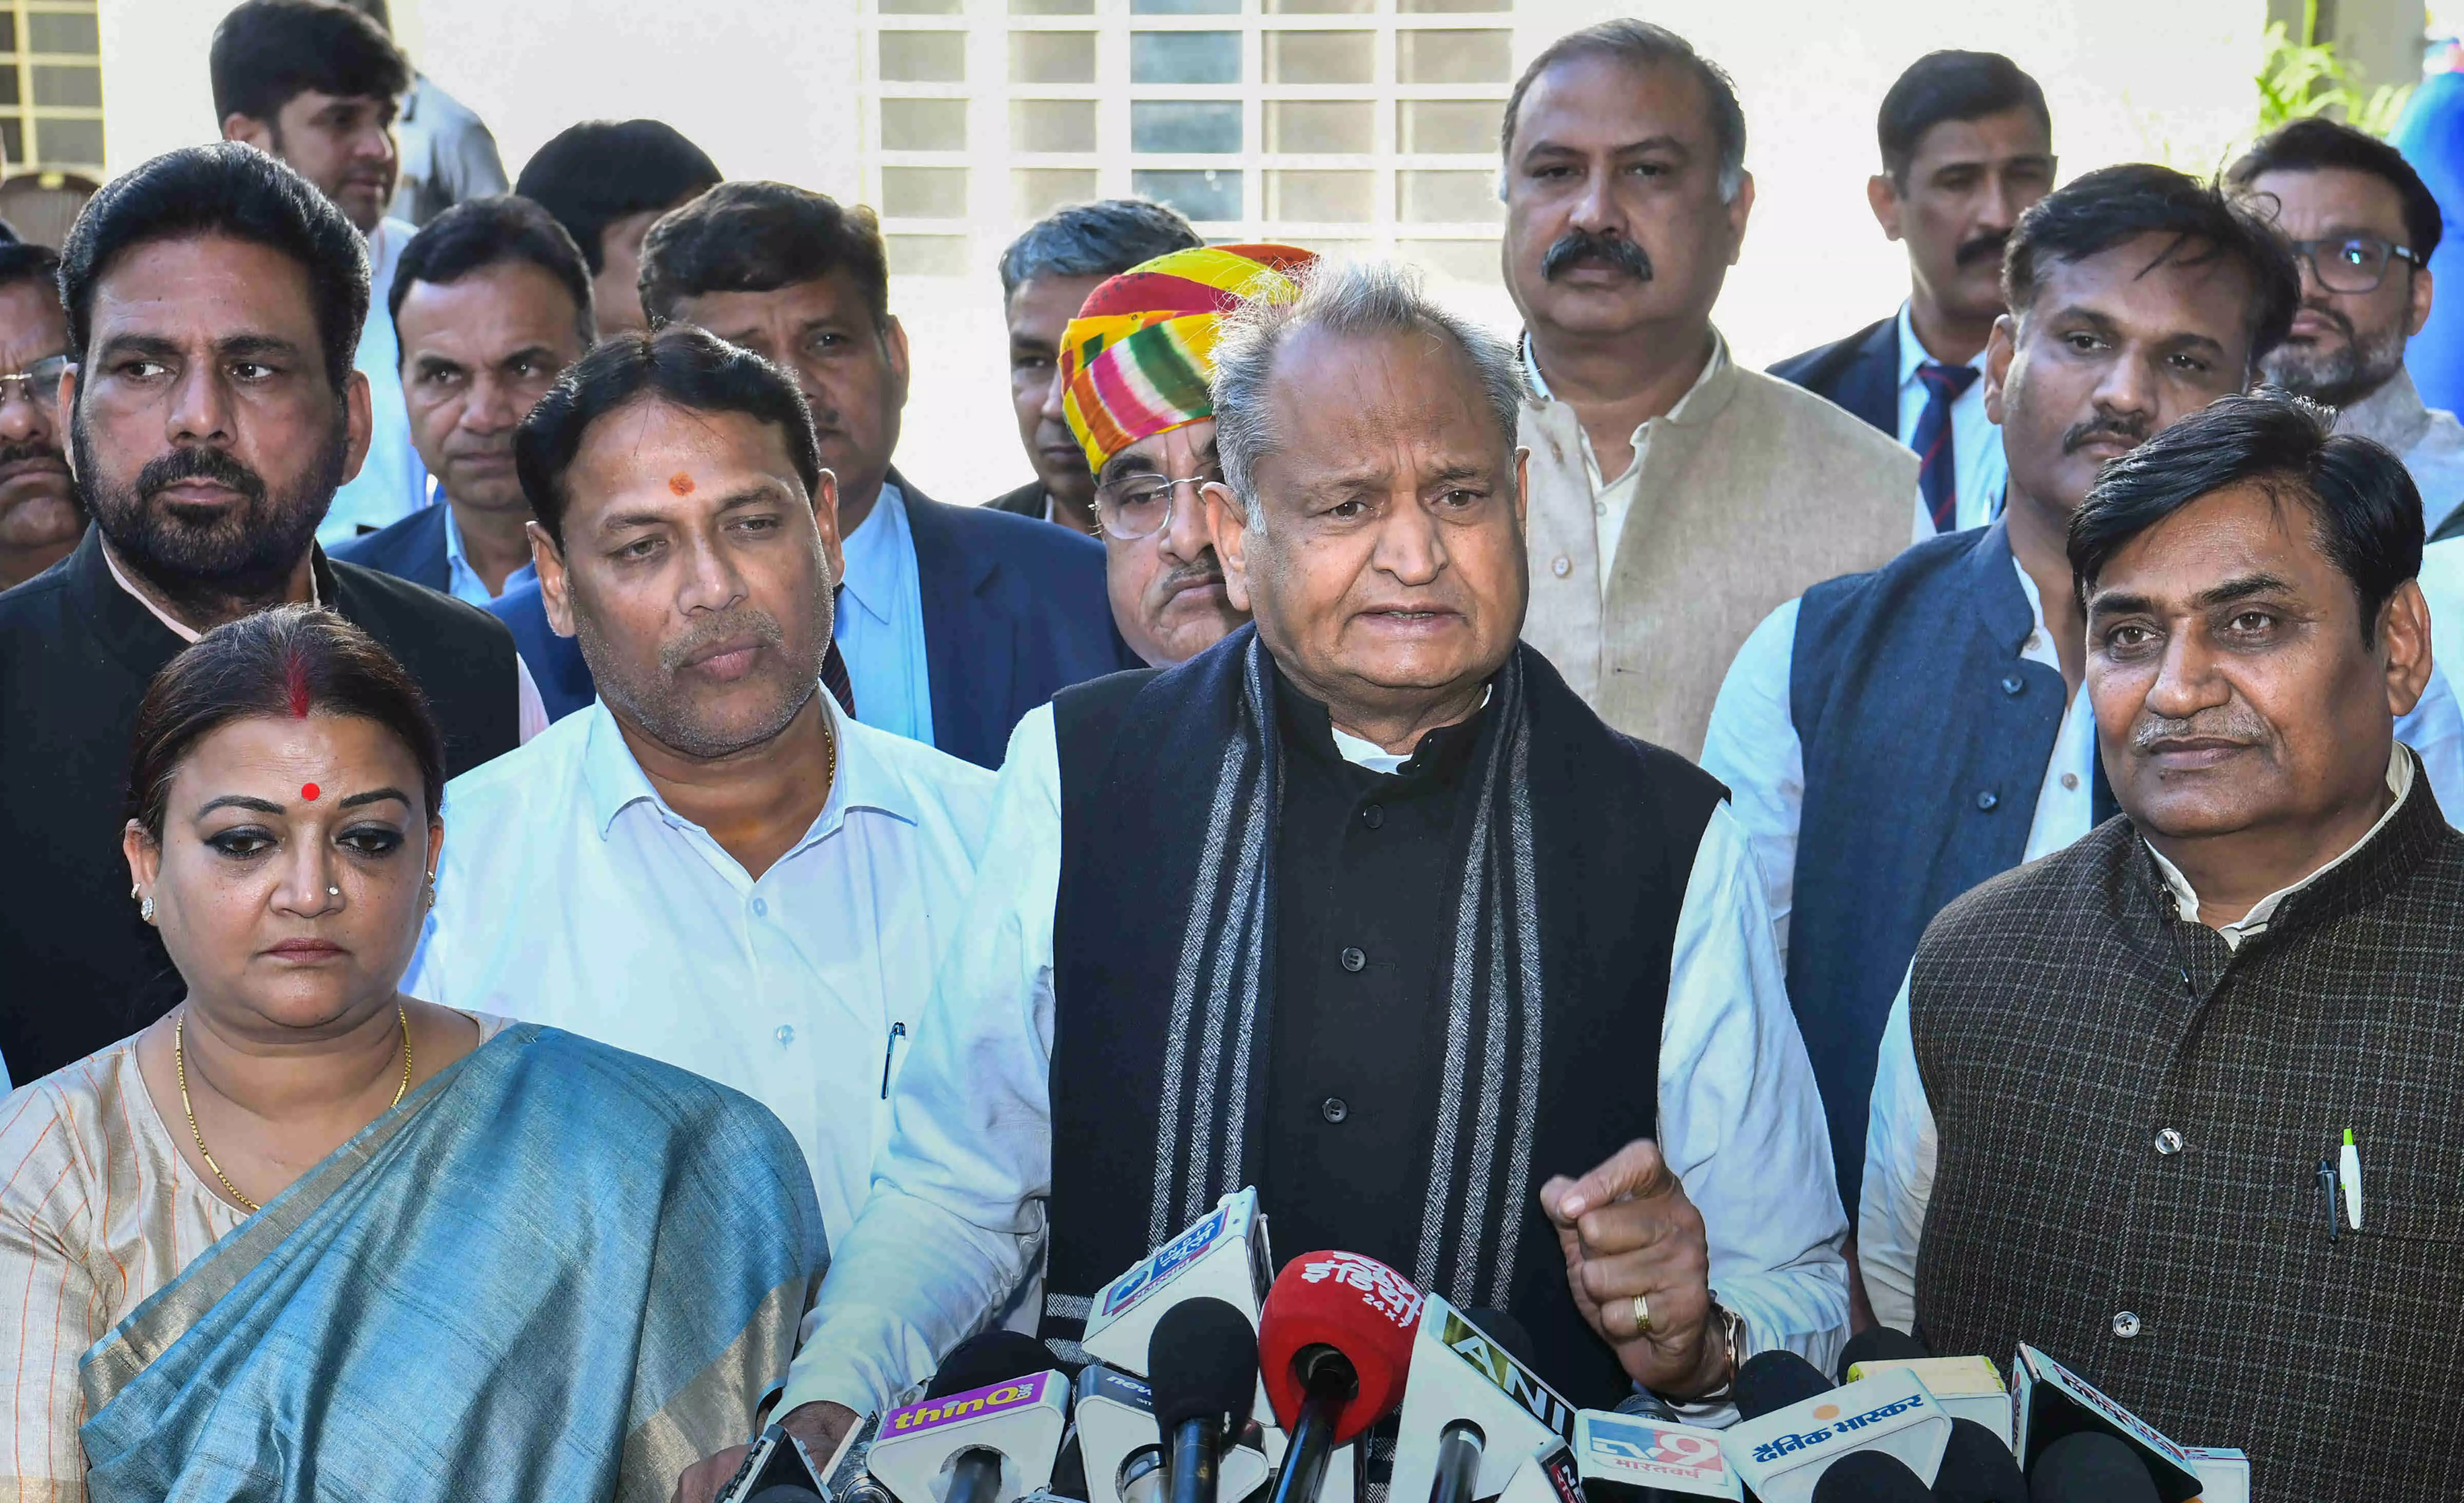 Rajasthan govt committed to overall development of tribal regions, says CM Gehlot